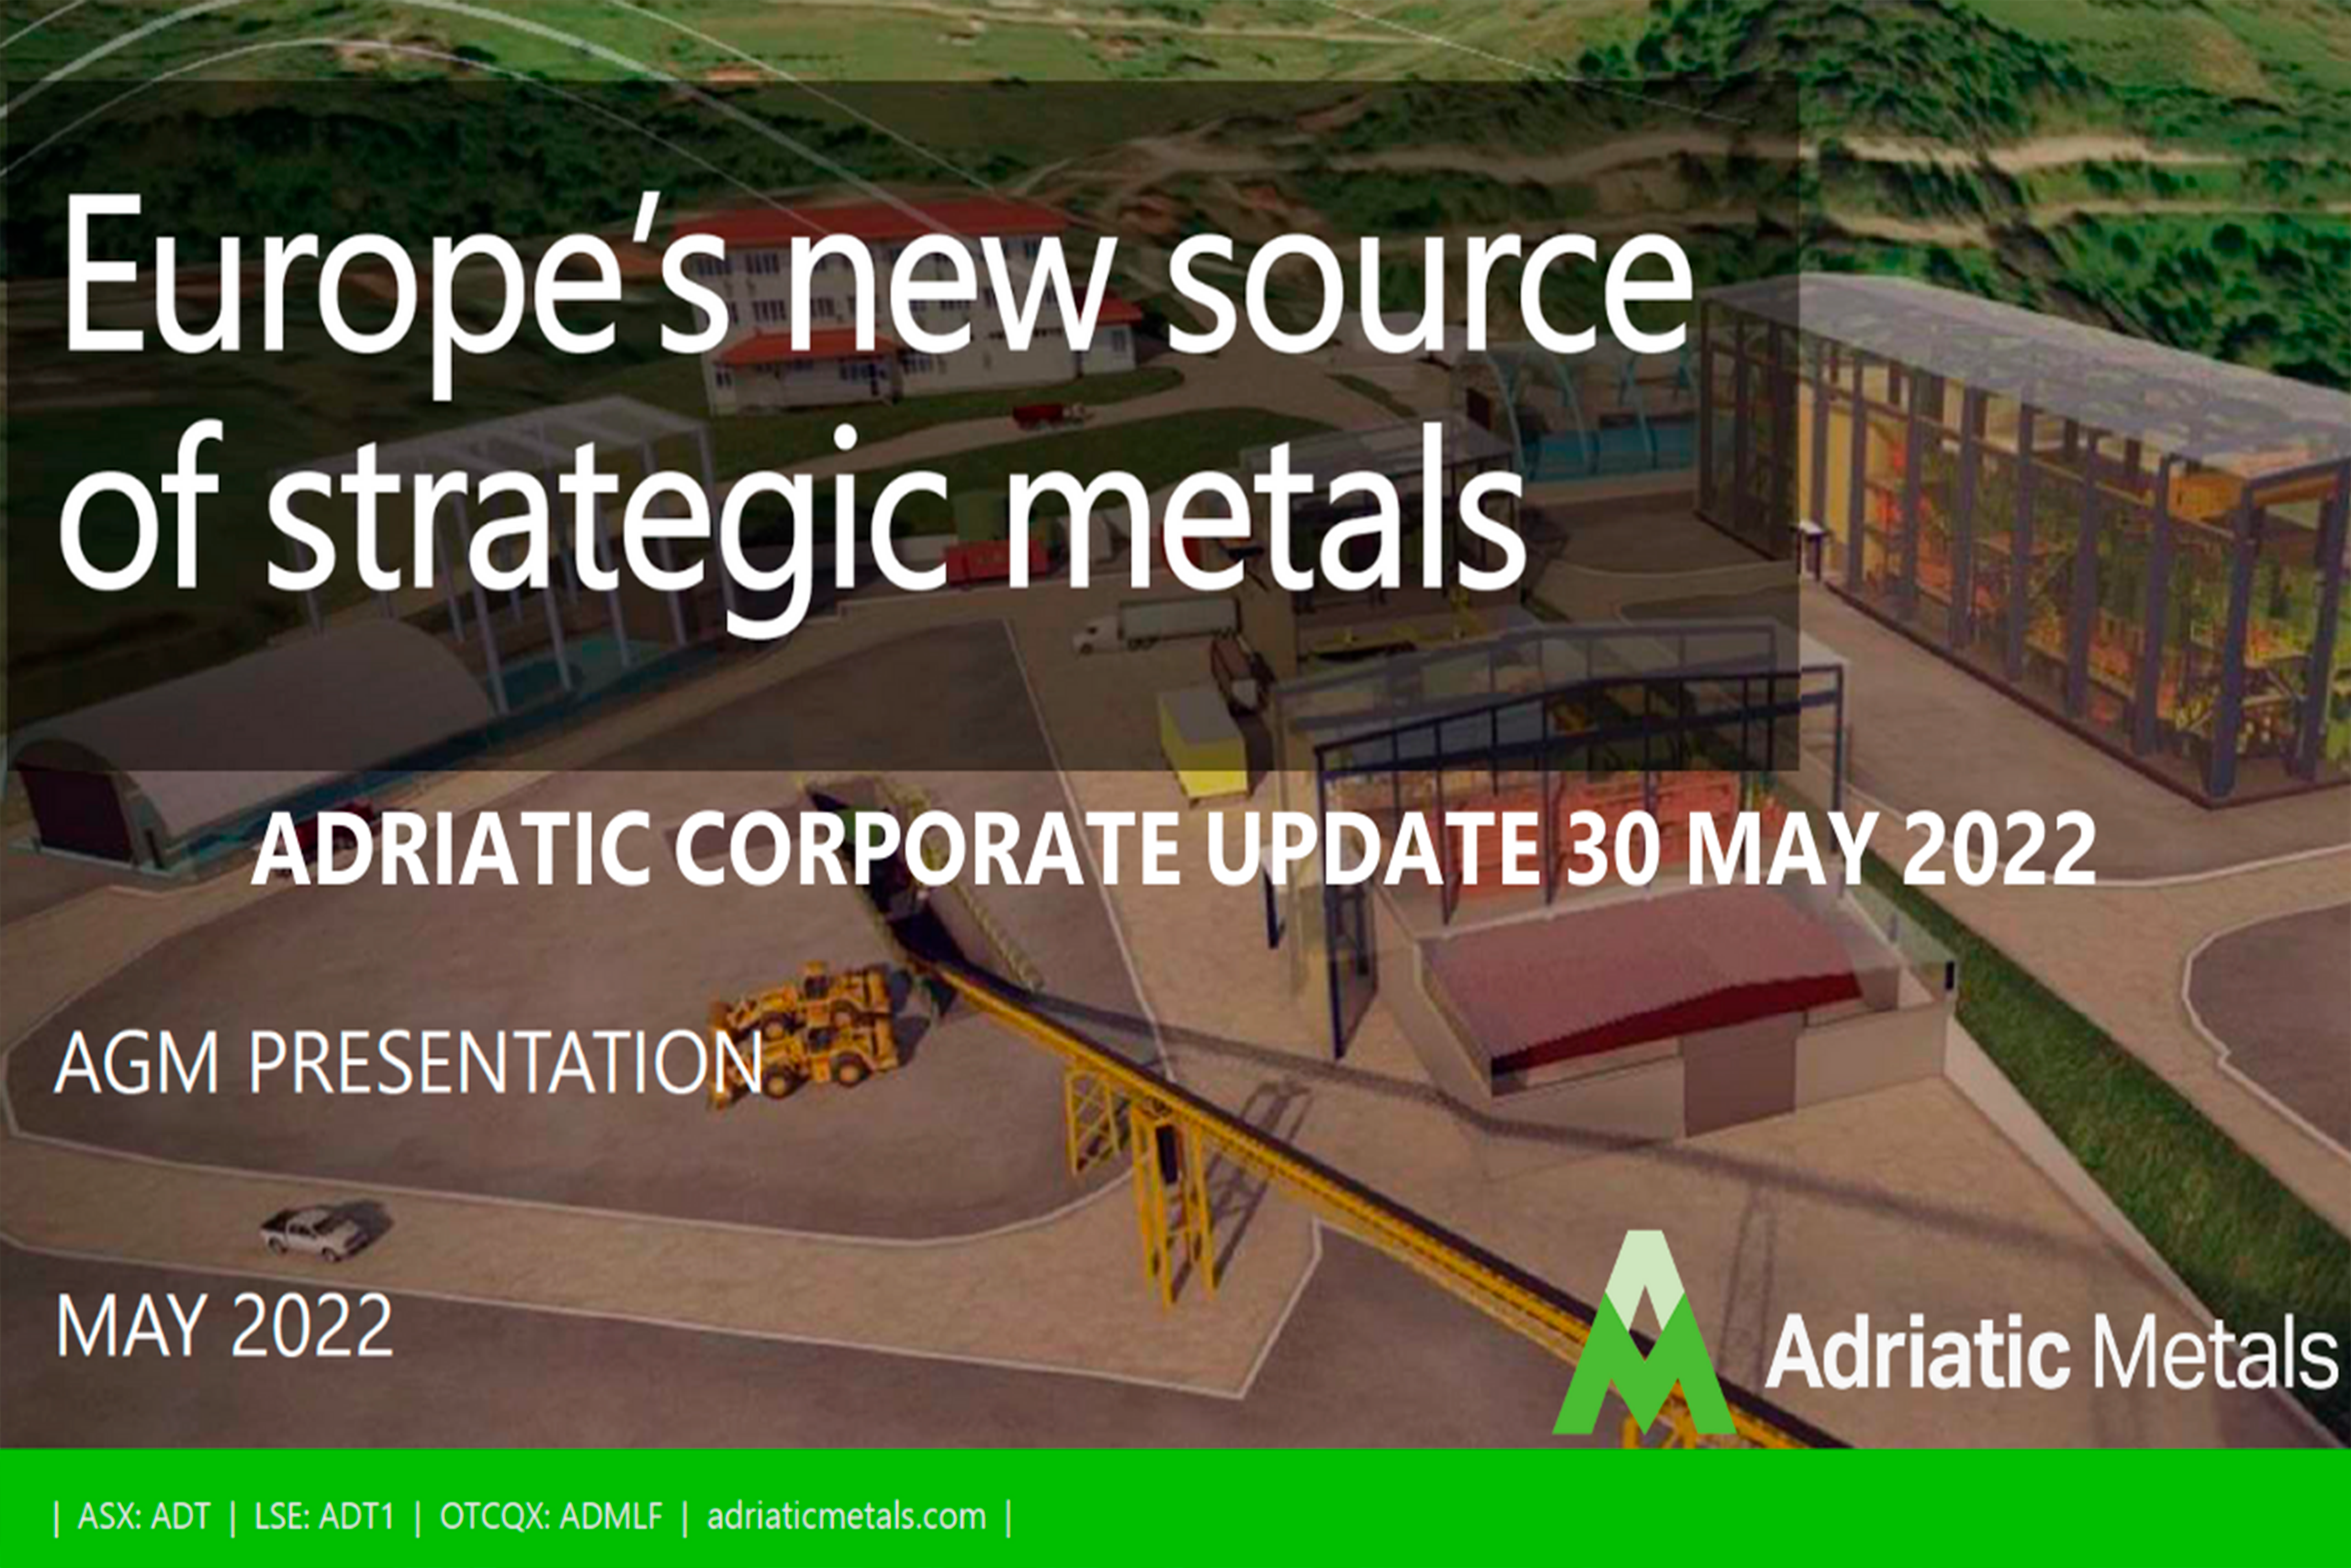 AGM Project Update Webinar 30 May 2022